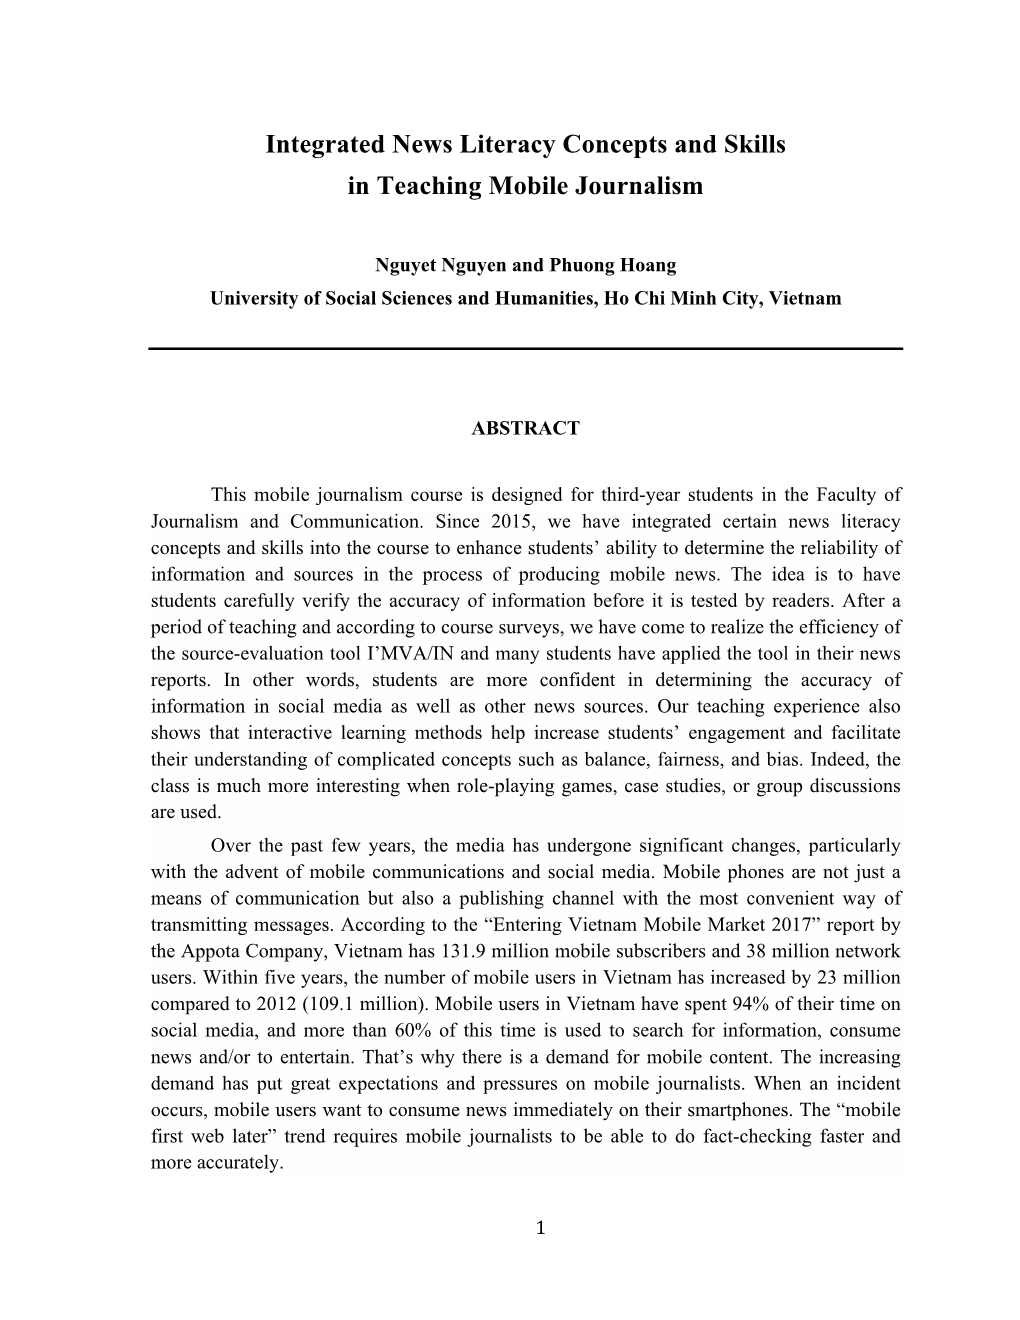 Integrated News Literacy Concepts and Skills in Teaching Mobile Journalism